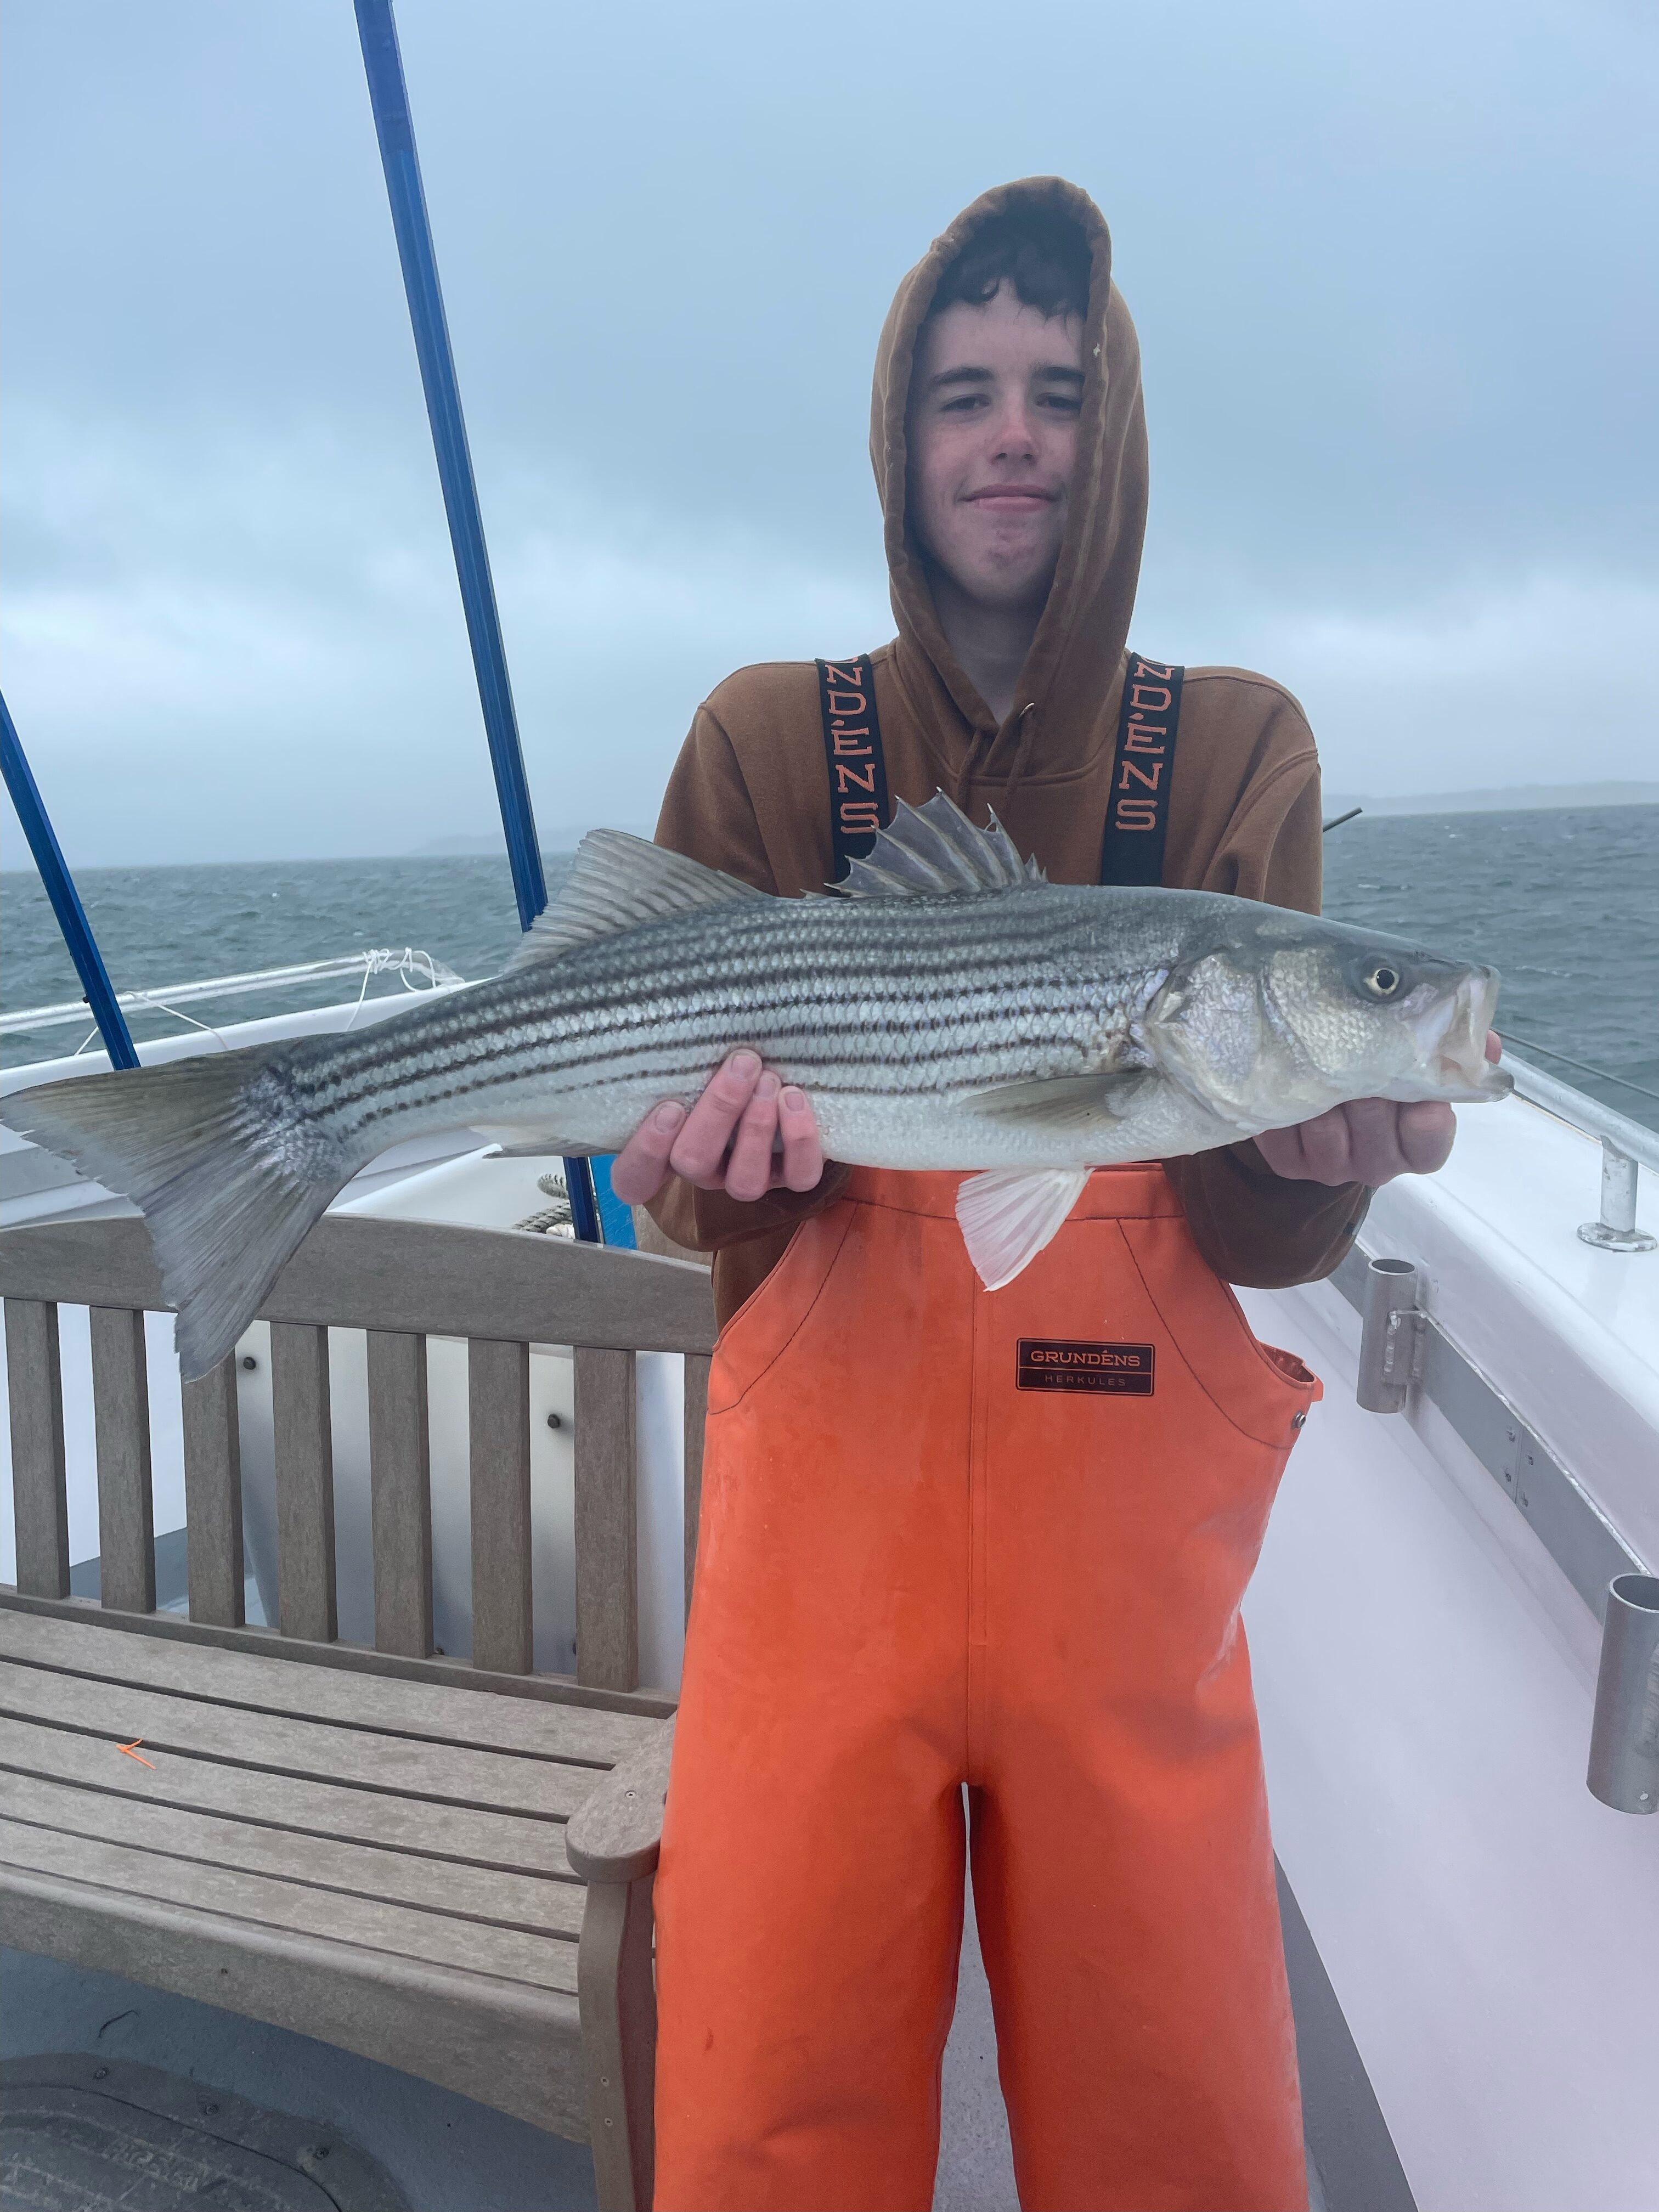 Kevin Kelly from Hampton Bays with a striper caught aboard the Hampton Lady over the weekend. Stripers have arrived in the local surf early again this year.